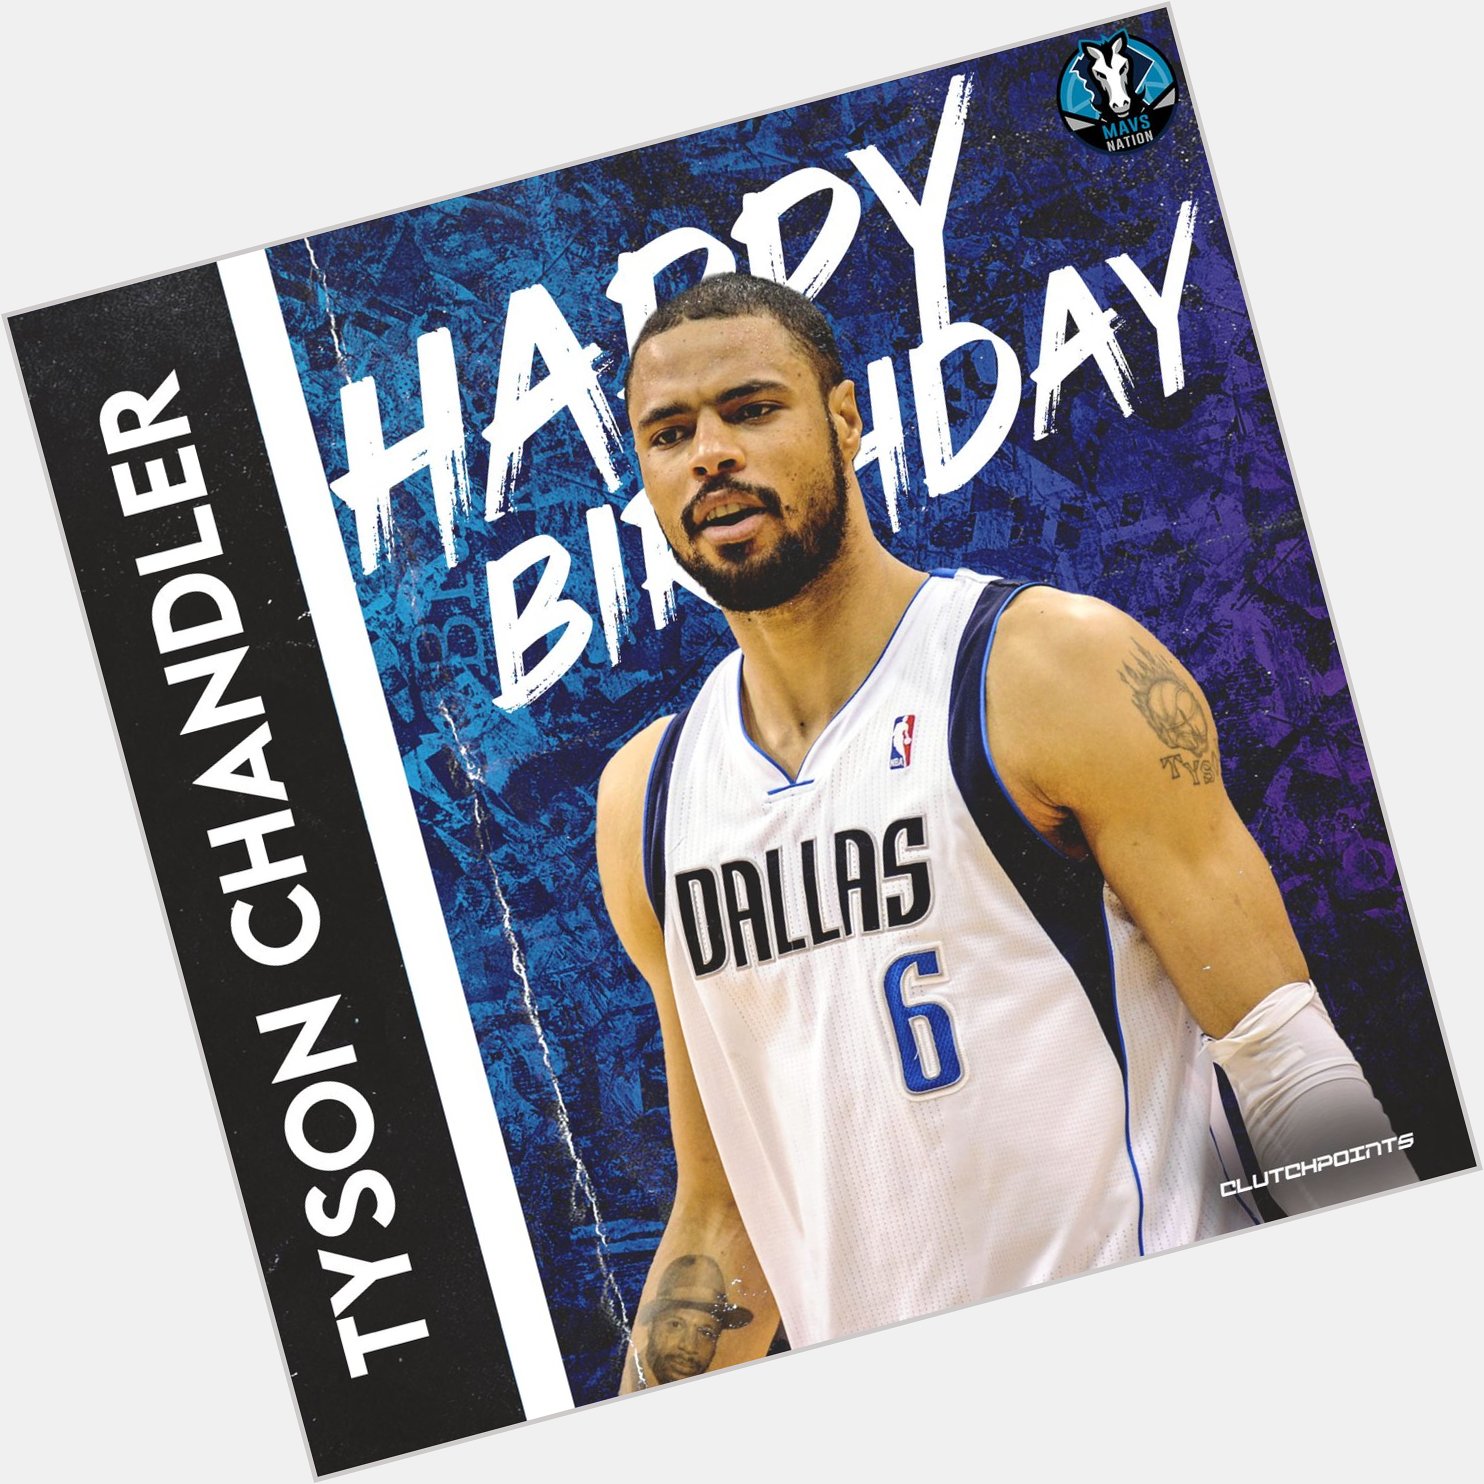 Join Mavericks Nation in greeting 1X NBA Champion and 2012 DPOY Tyson Chandler a happy 39th birthday!  